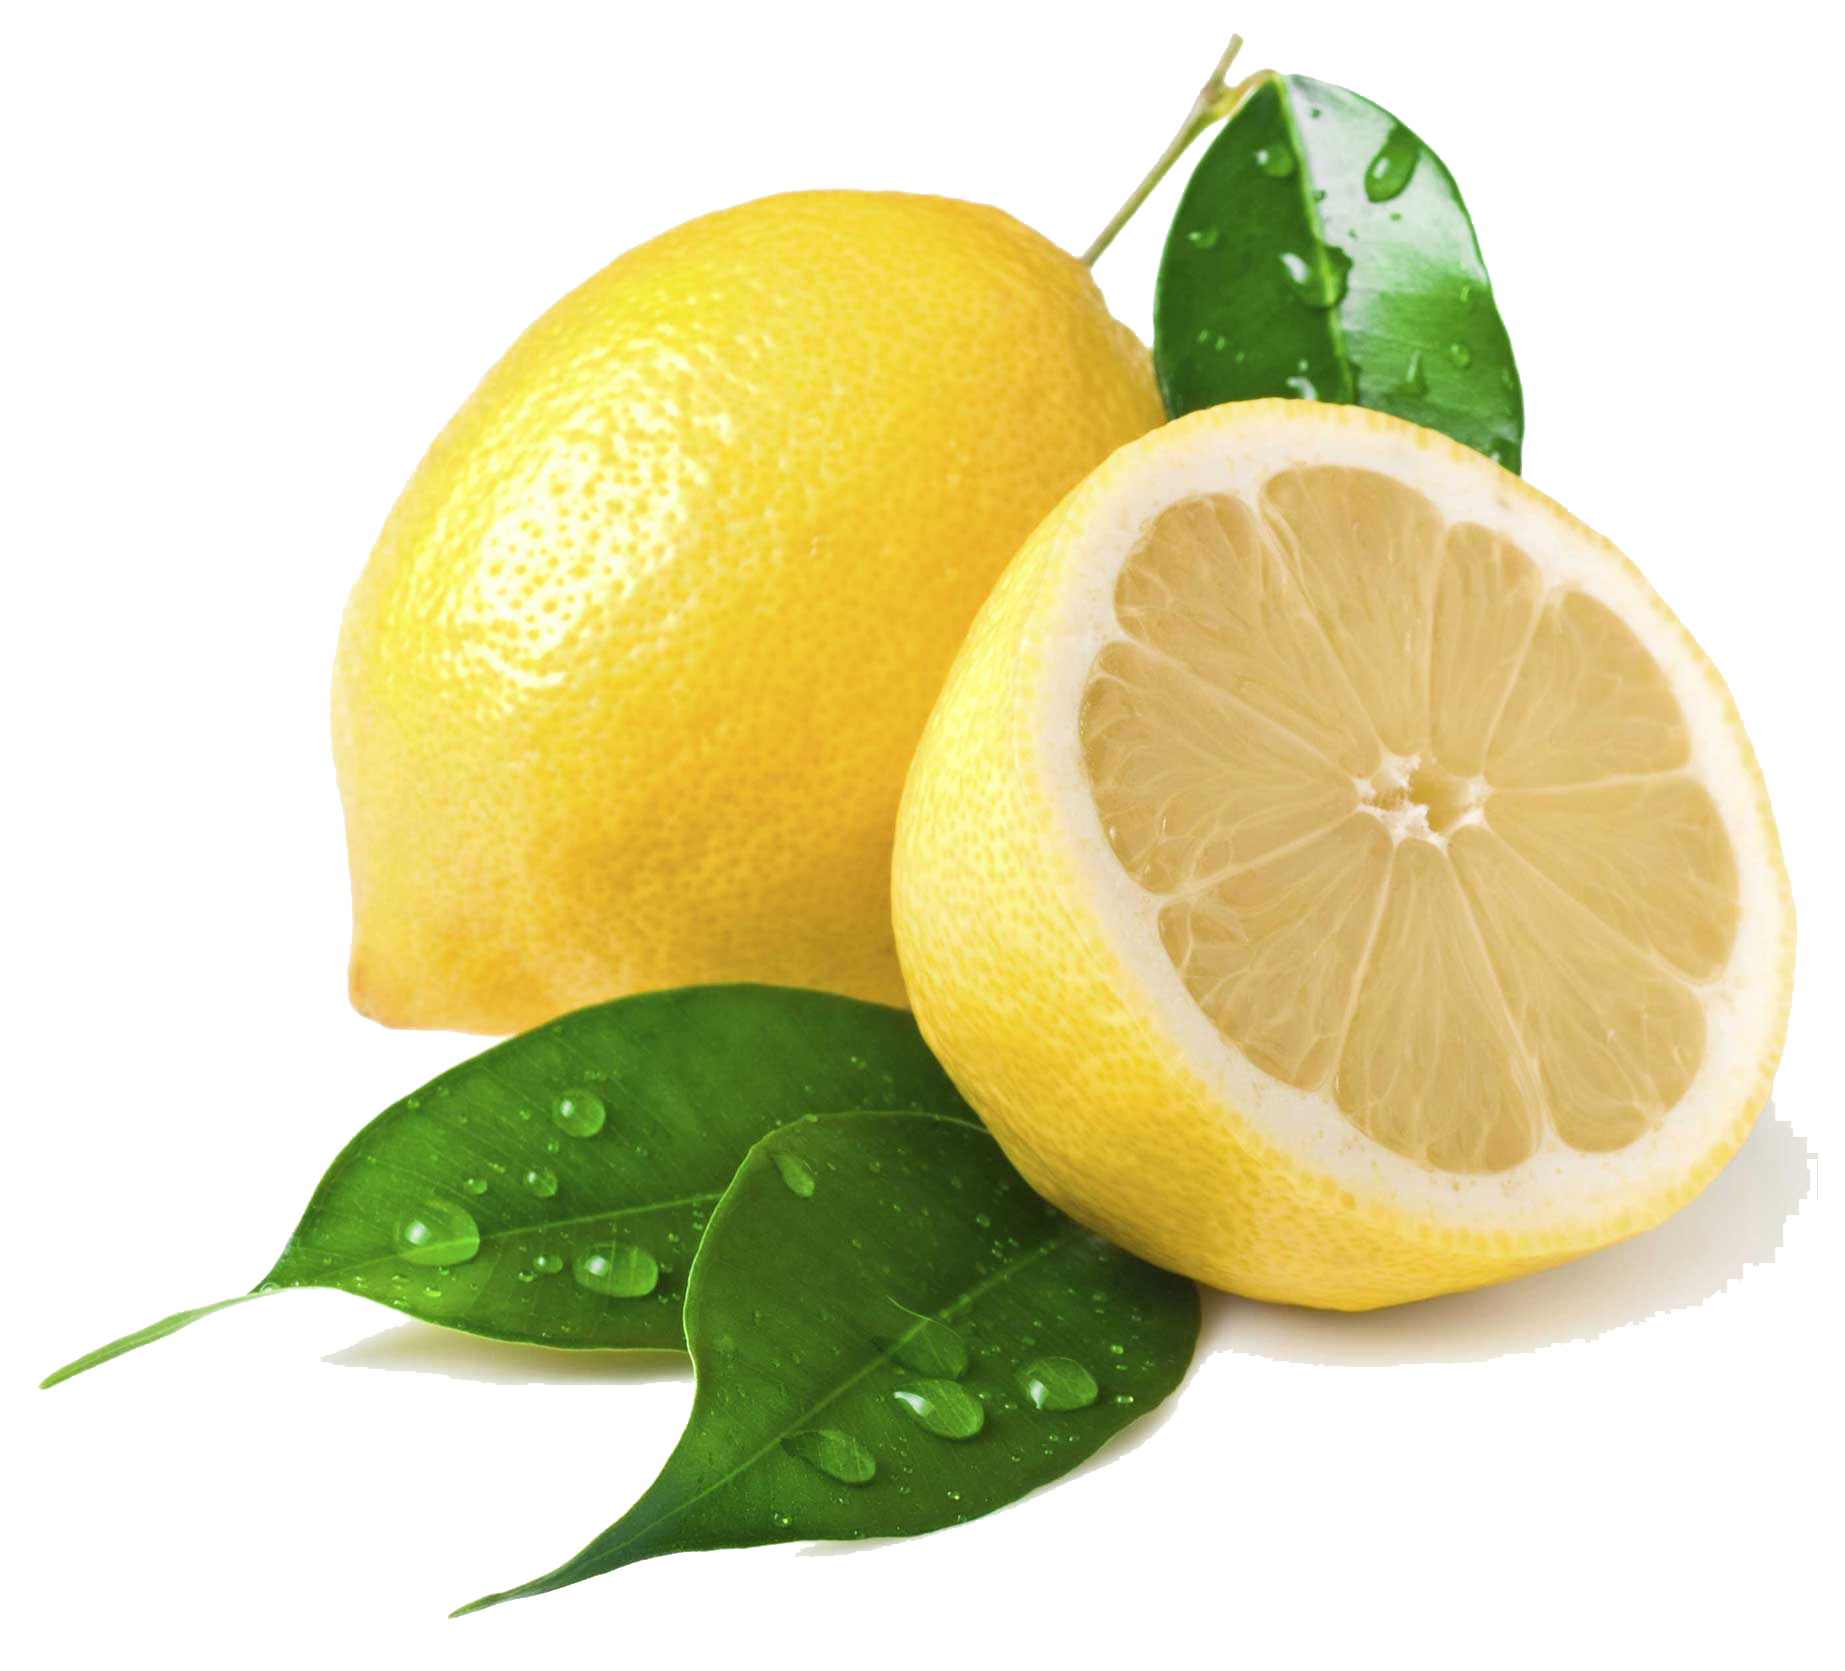 Limone png hd